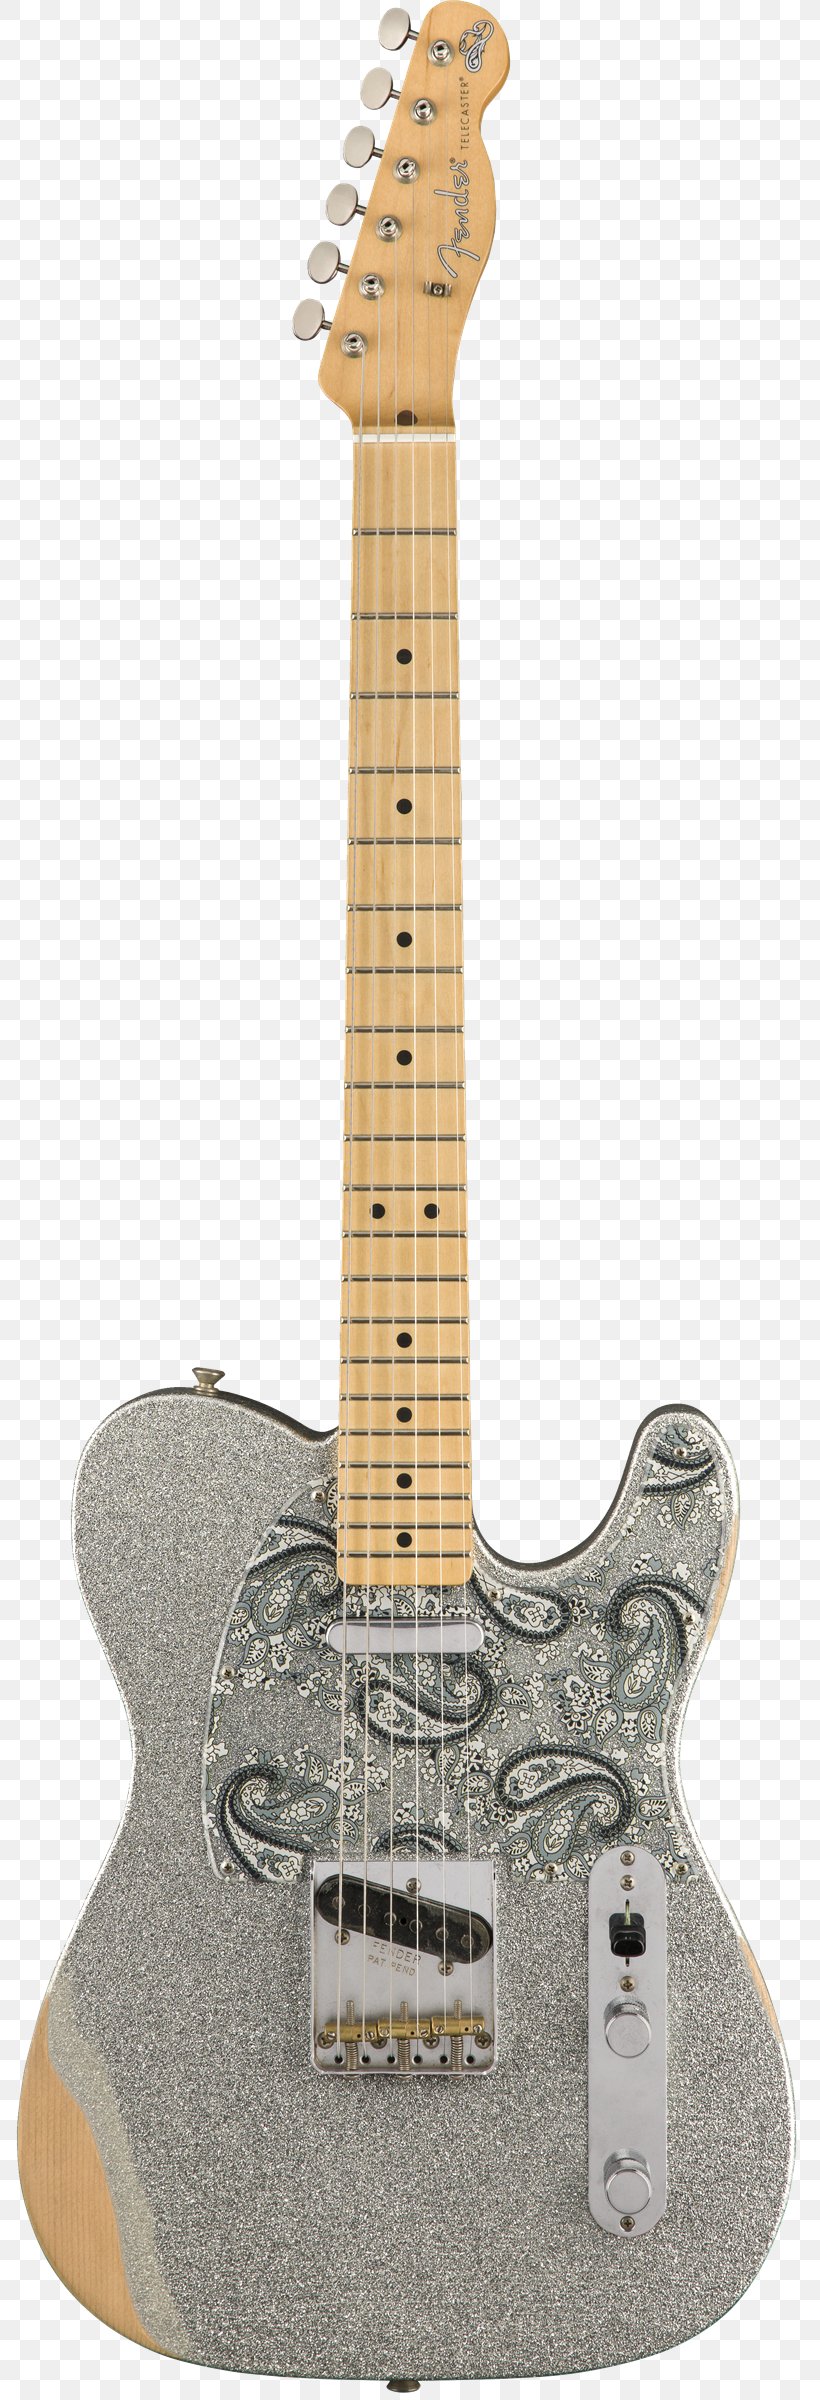 Fender Telecaster Thinline Guitar Musical Instruments Fender Stratocaster, PNG, 787x2400px, Fender Telecaster, Acoustic Electric Guitar, Bass Guitar, Brad Paisley, Electric Guitar Download Free